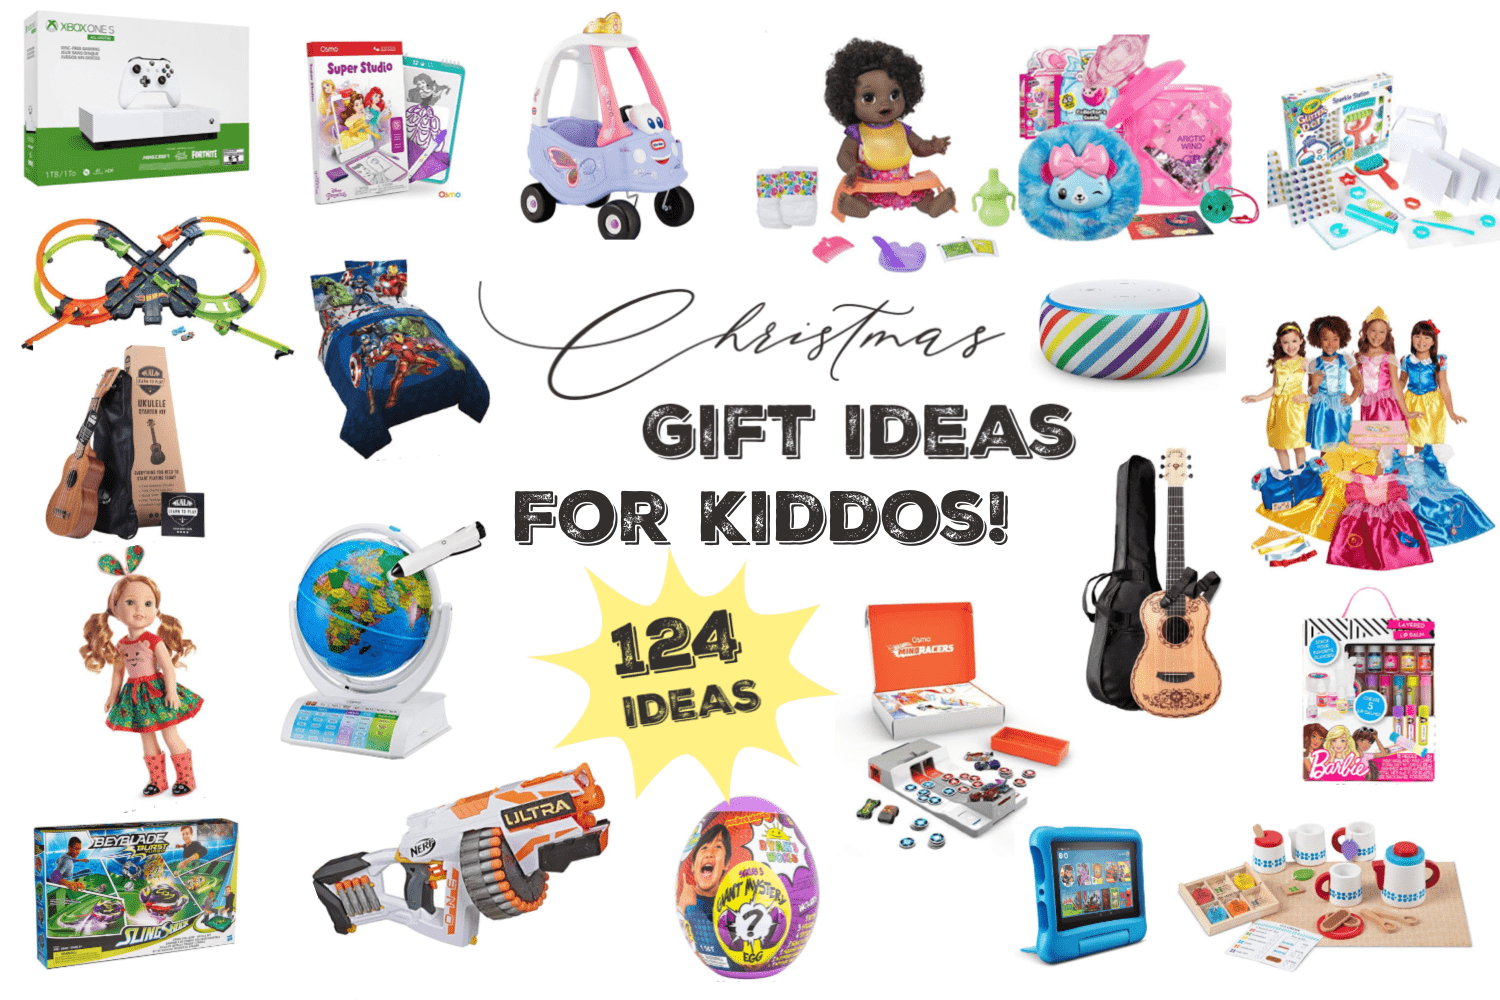 Kids Christmas Gift Guide 124 Amazon Gift Ideas For Every Child! The